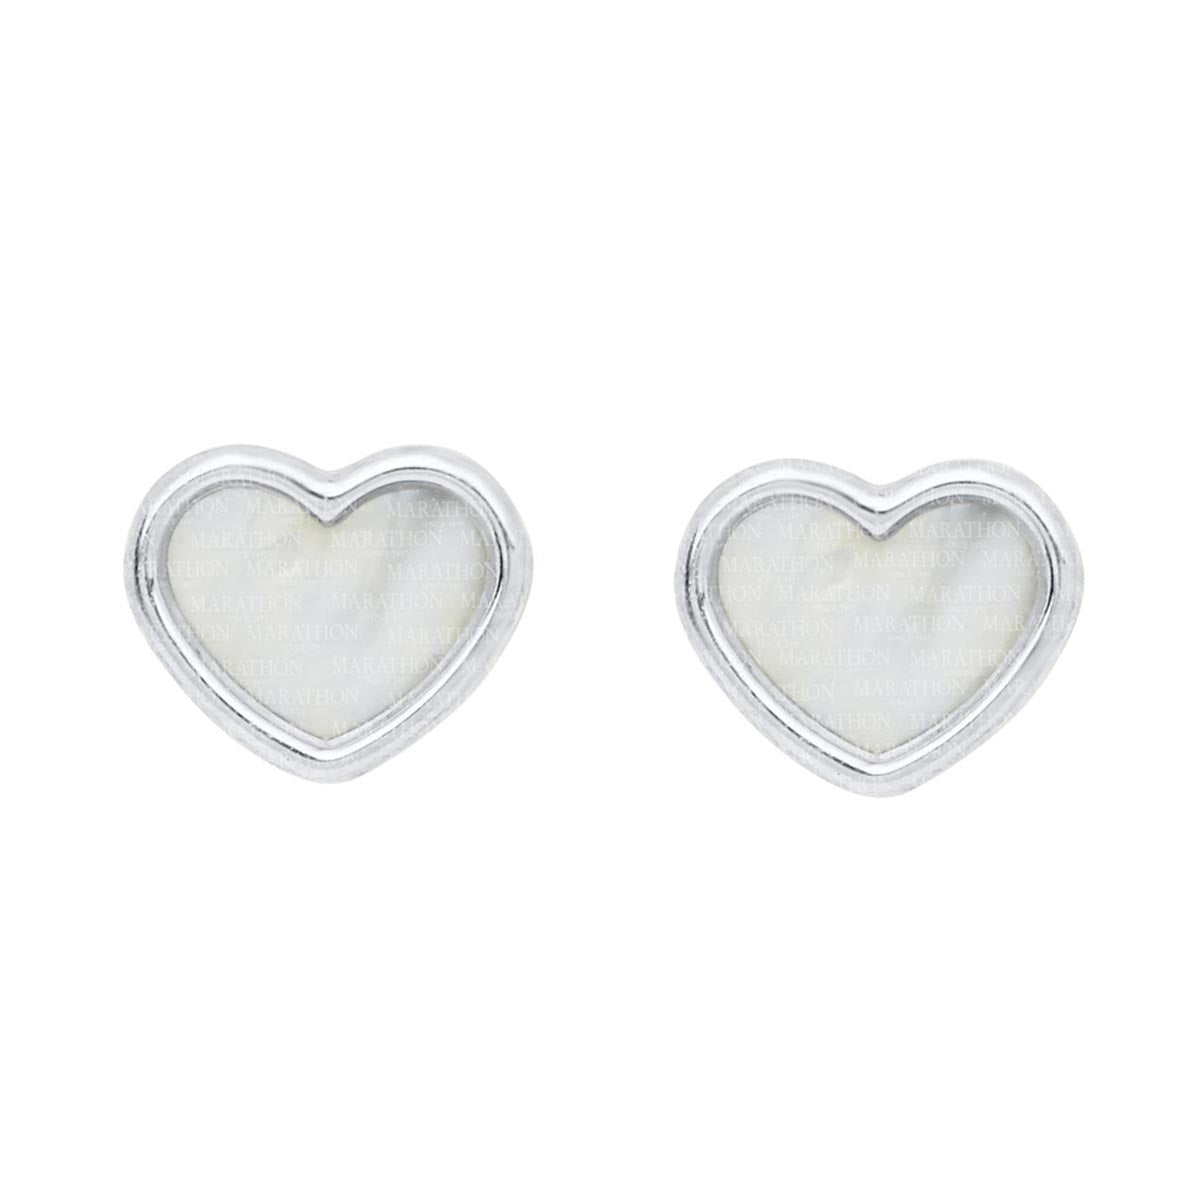 Childrens Mother of Pearl Heart Stud Earrings in Sterling Silver